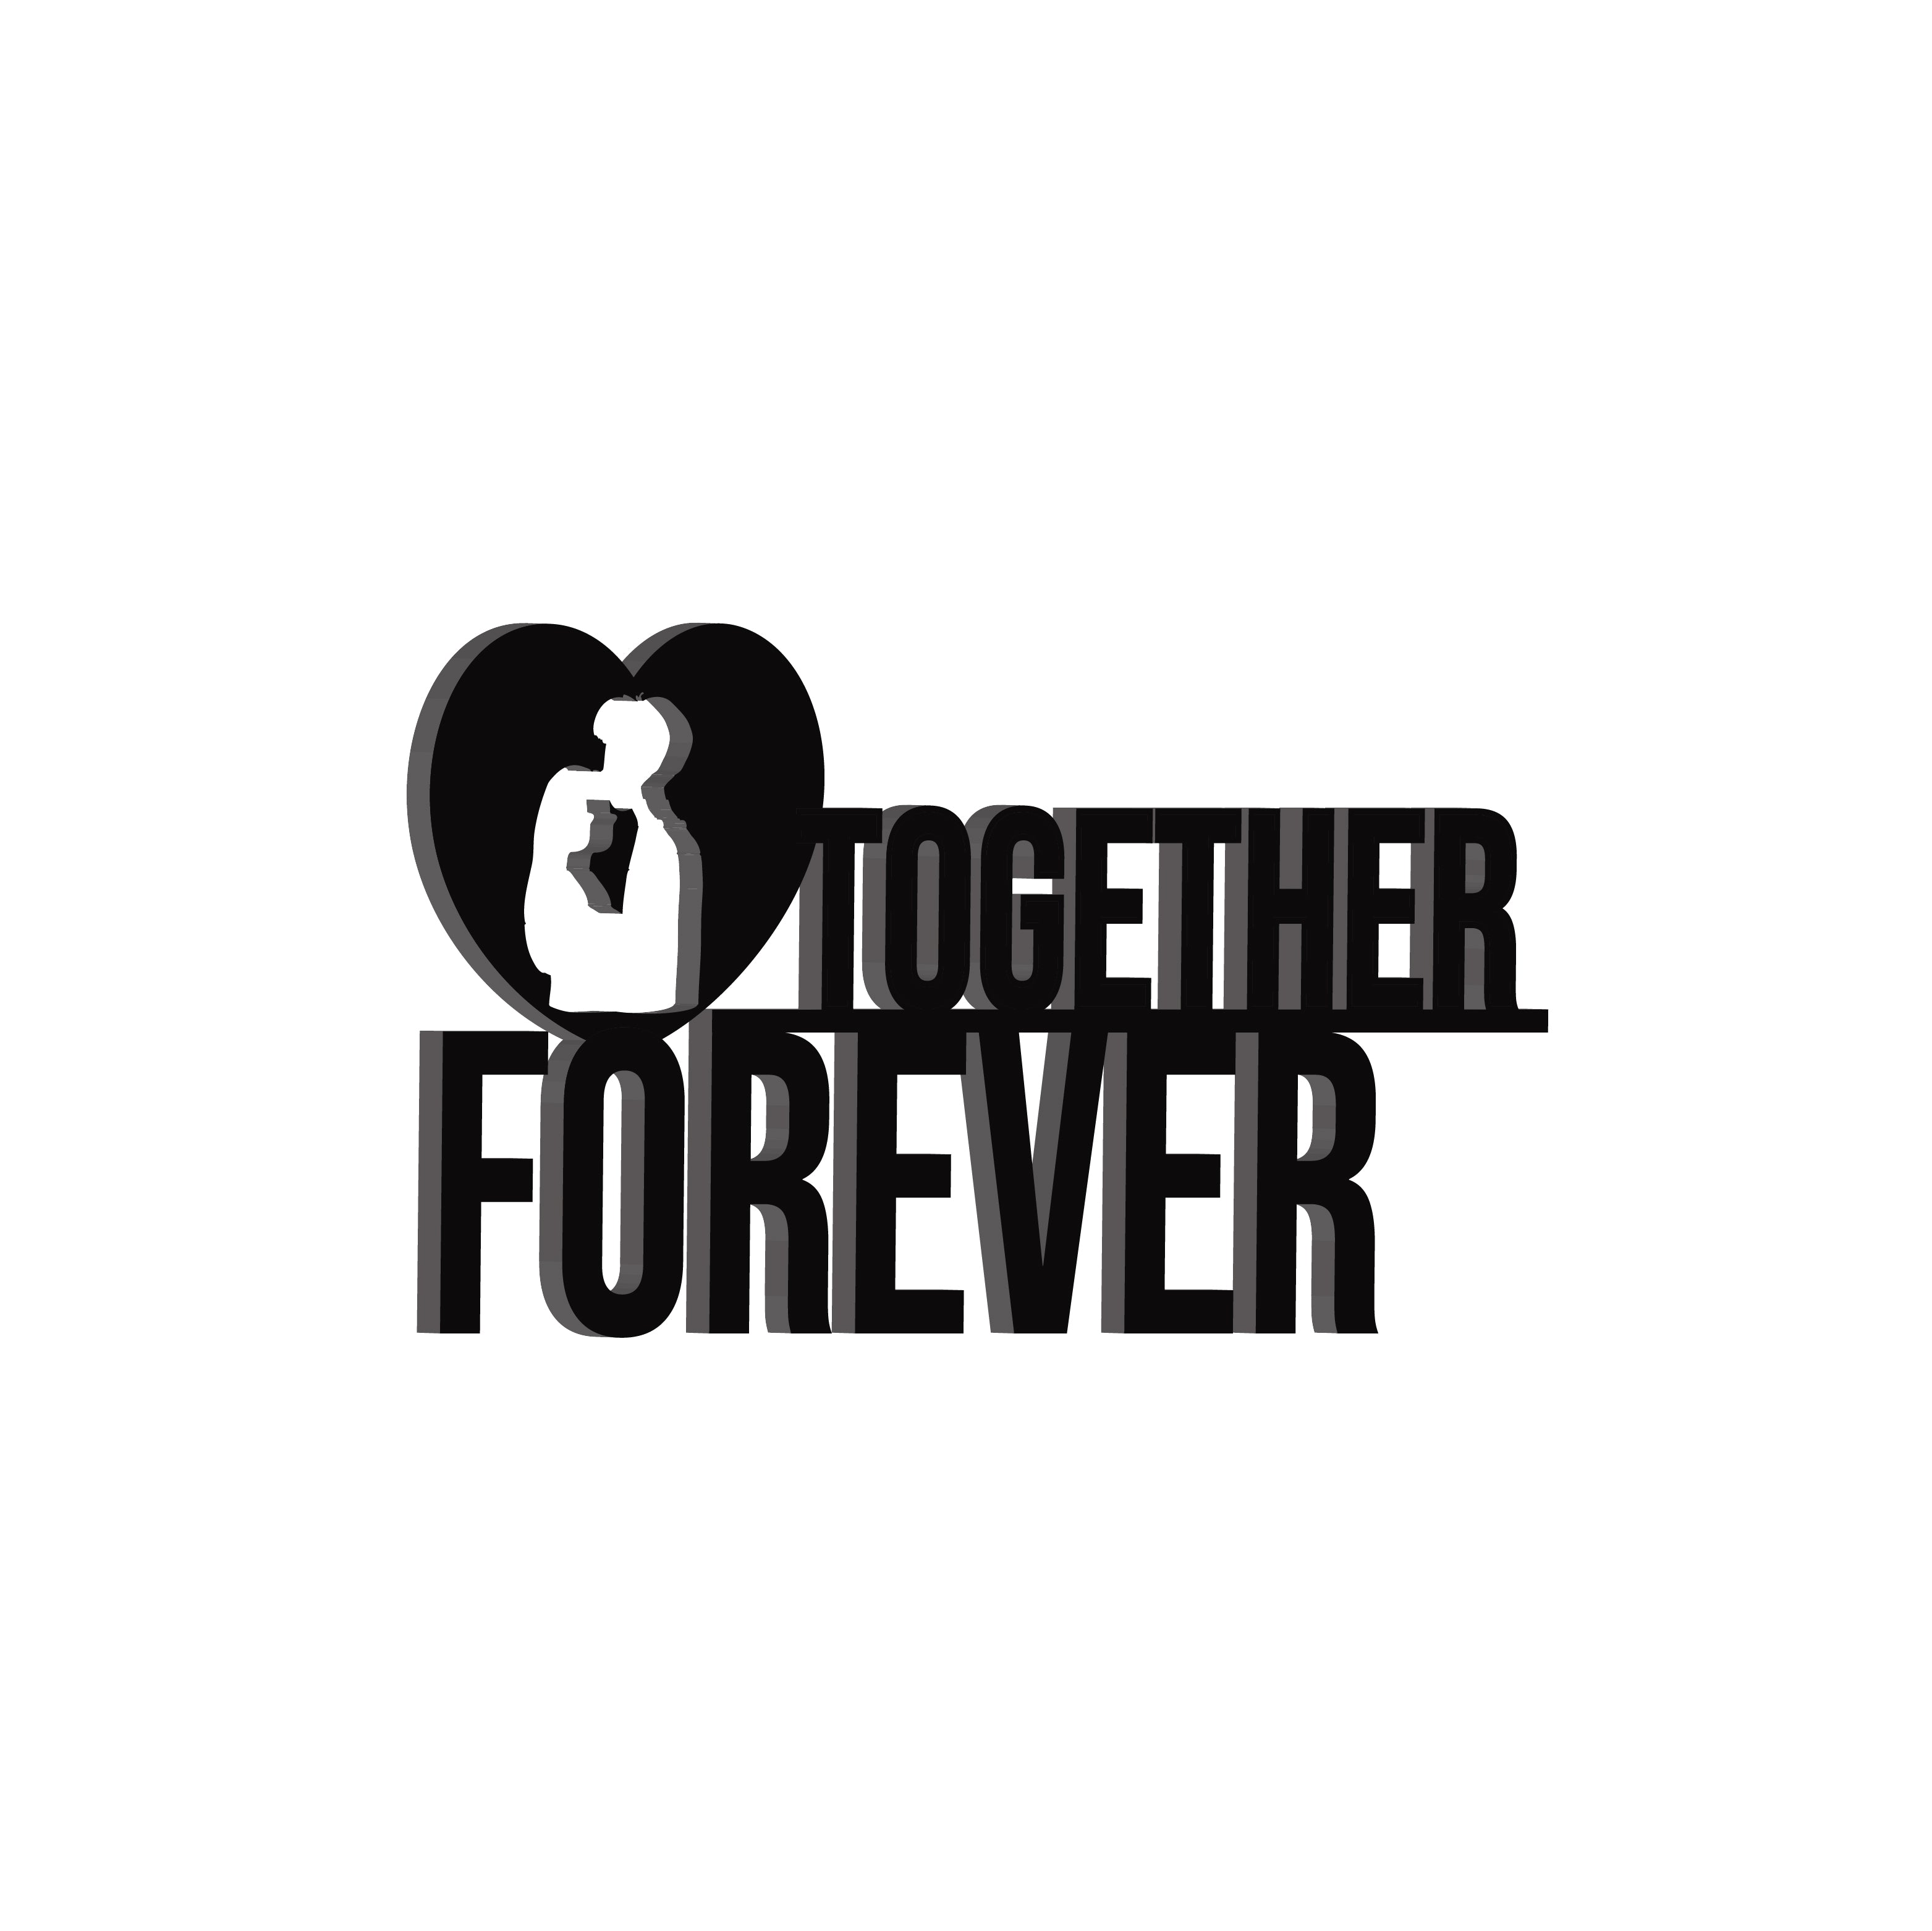 "Together Forever" Black Engineered Wood Wall Art Cutout, Ready to Hang Home Decor 4